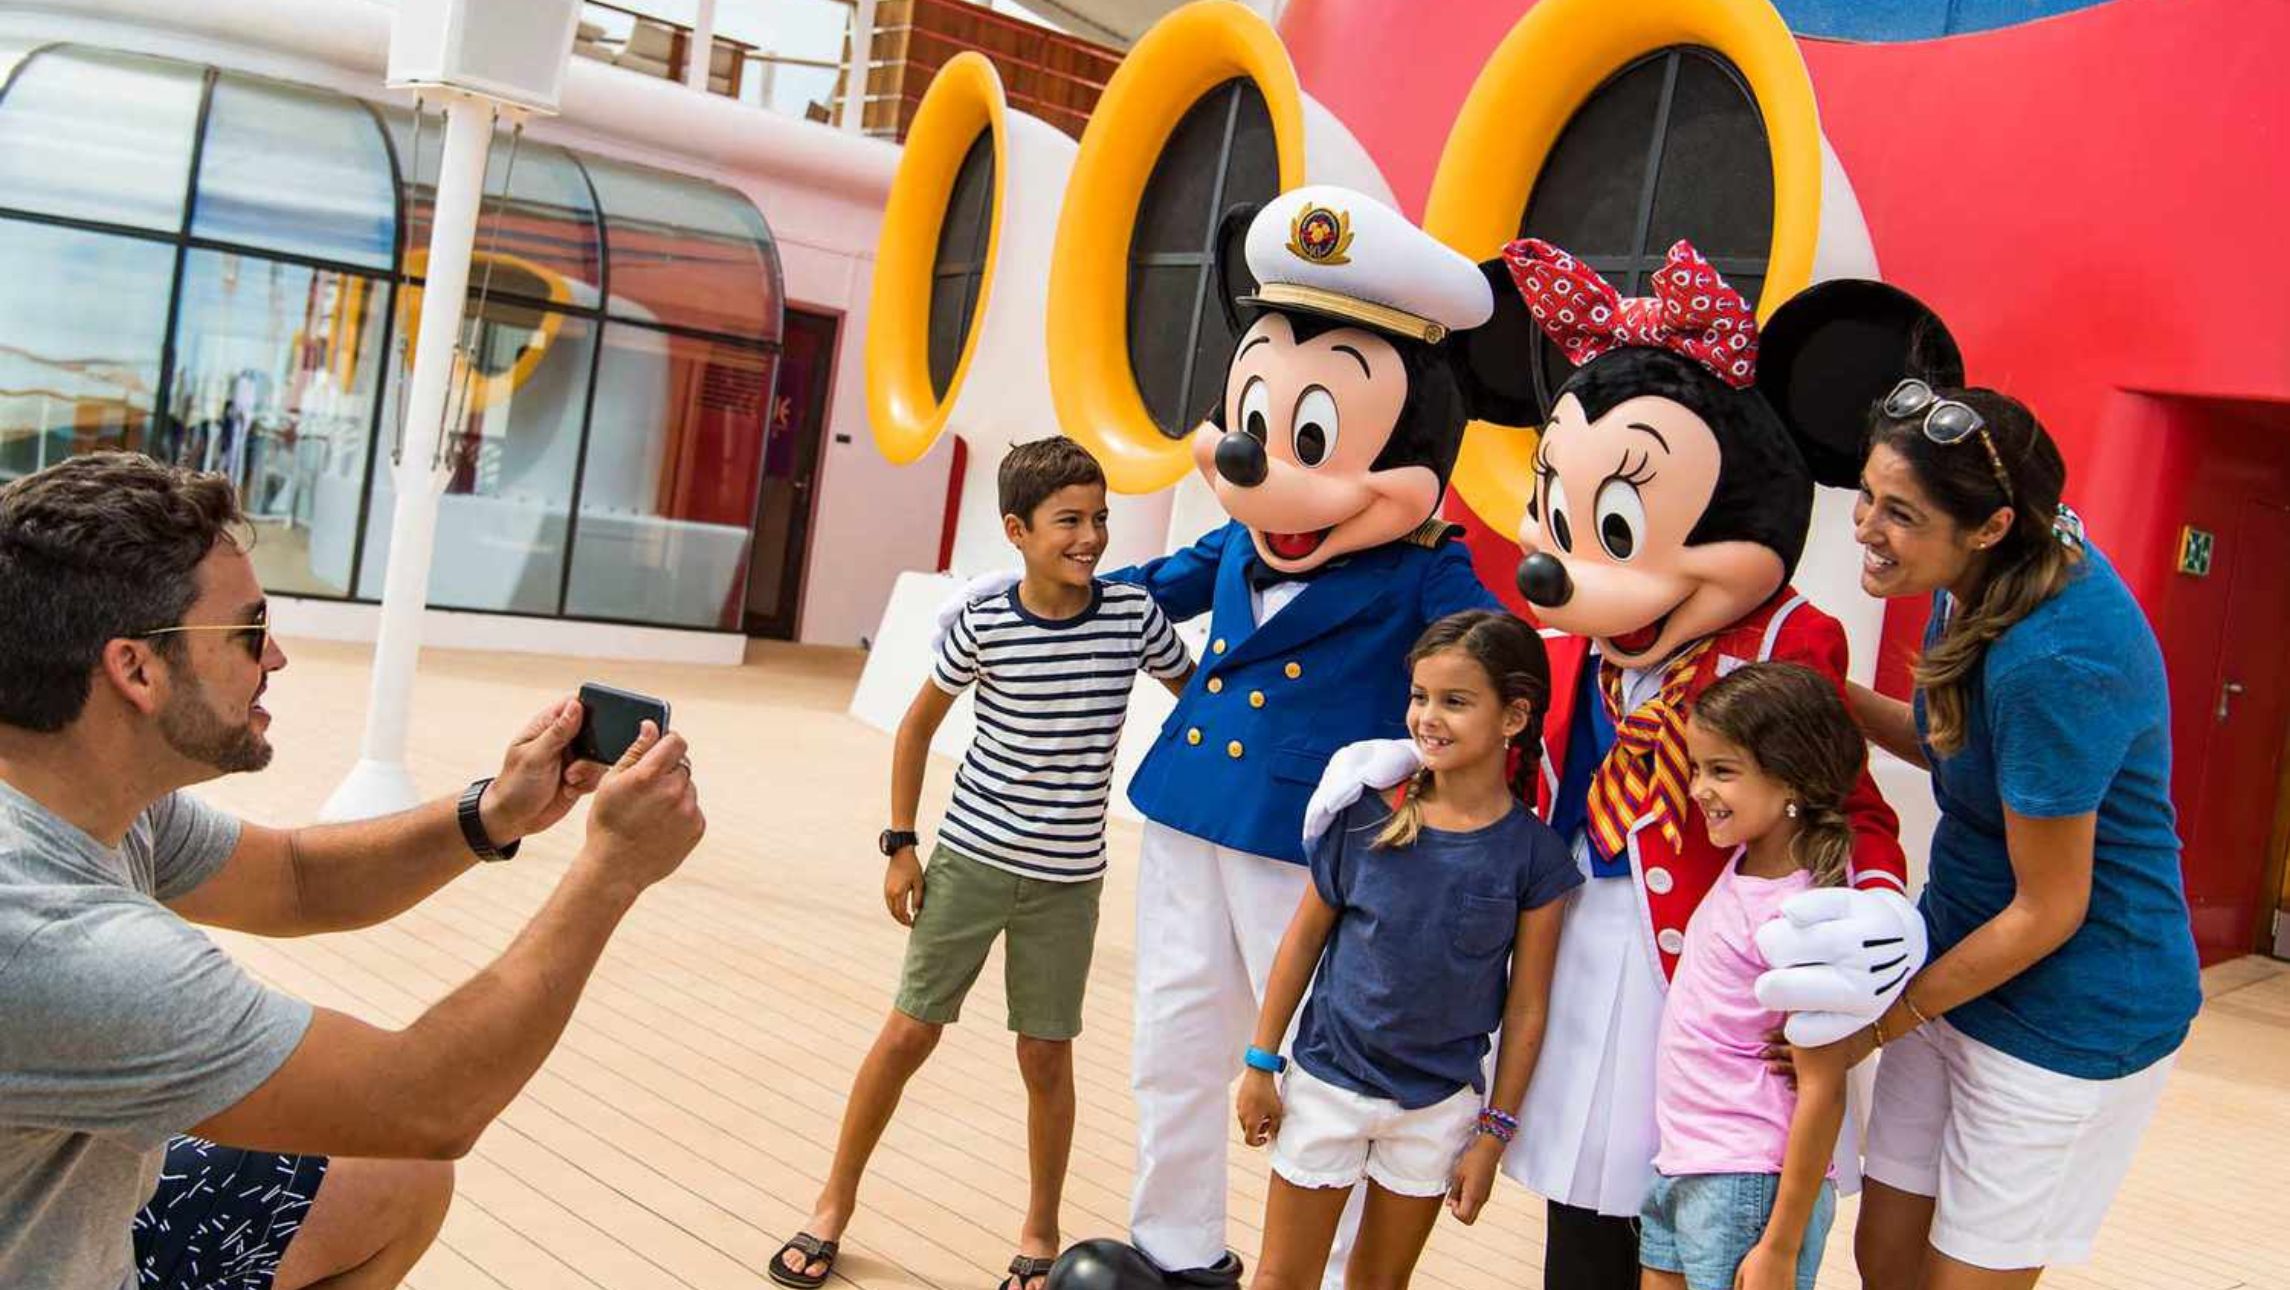 Disney Cruise Line's new season family taking a picture with Mickey and Minnie